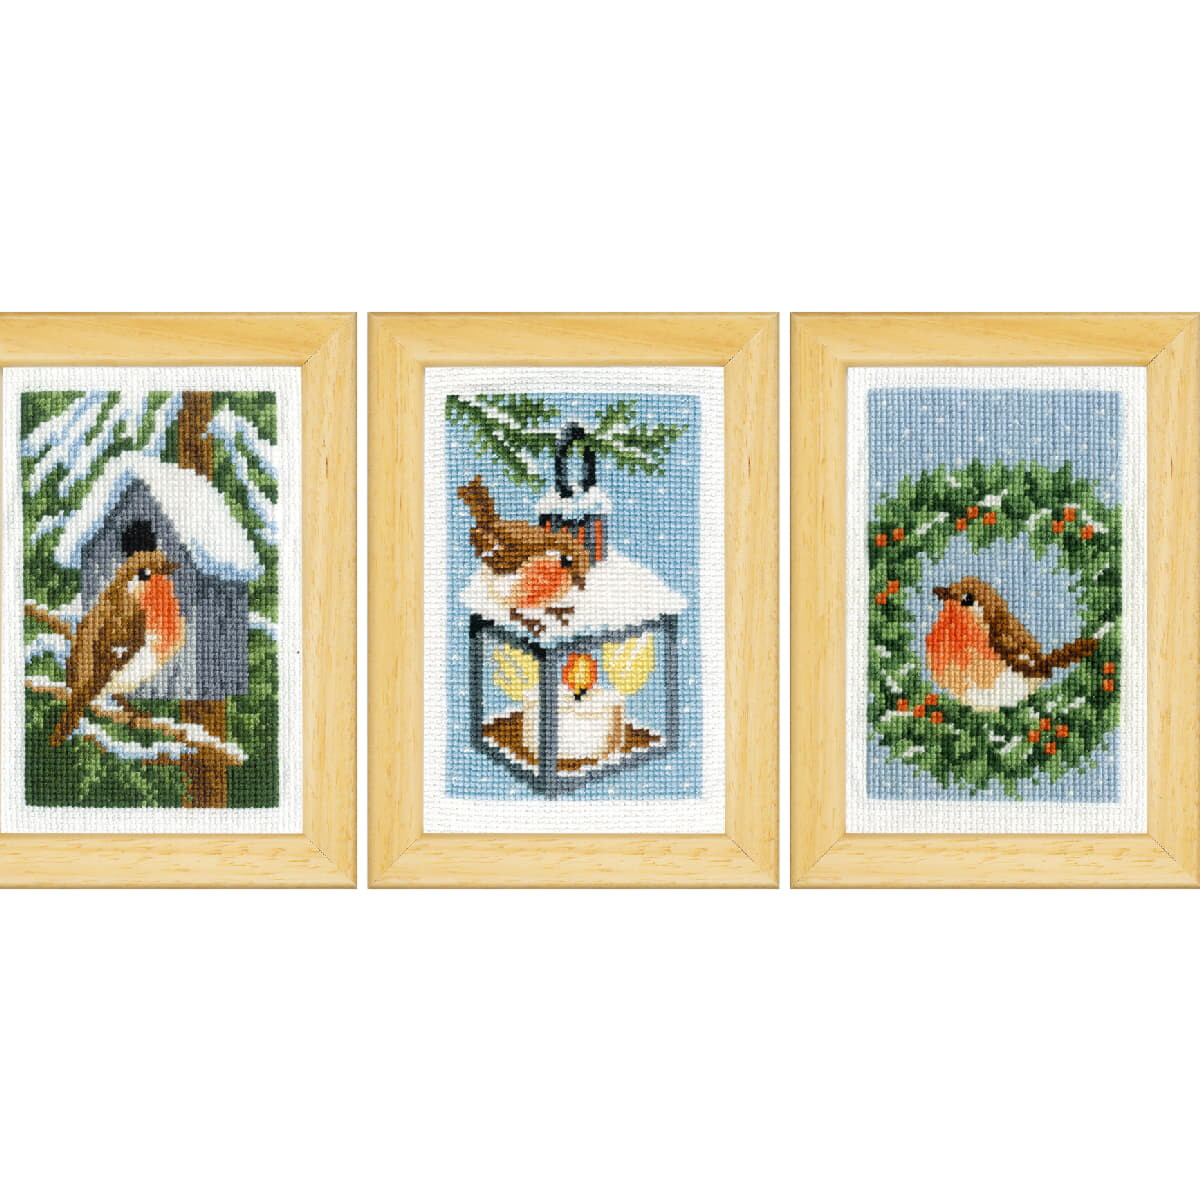 Vervaco counted cross stitch kit "Robins in...